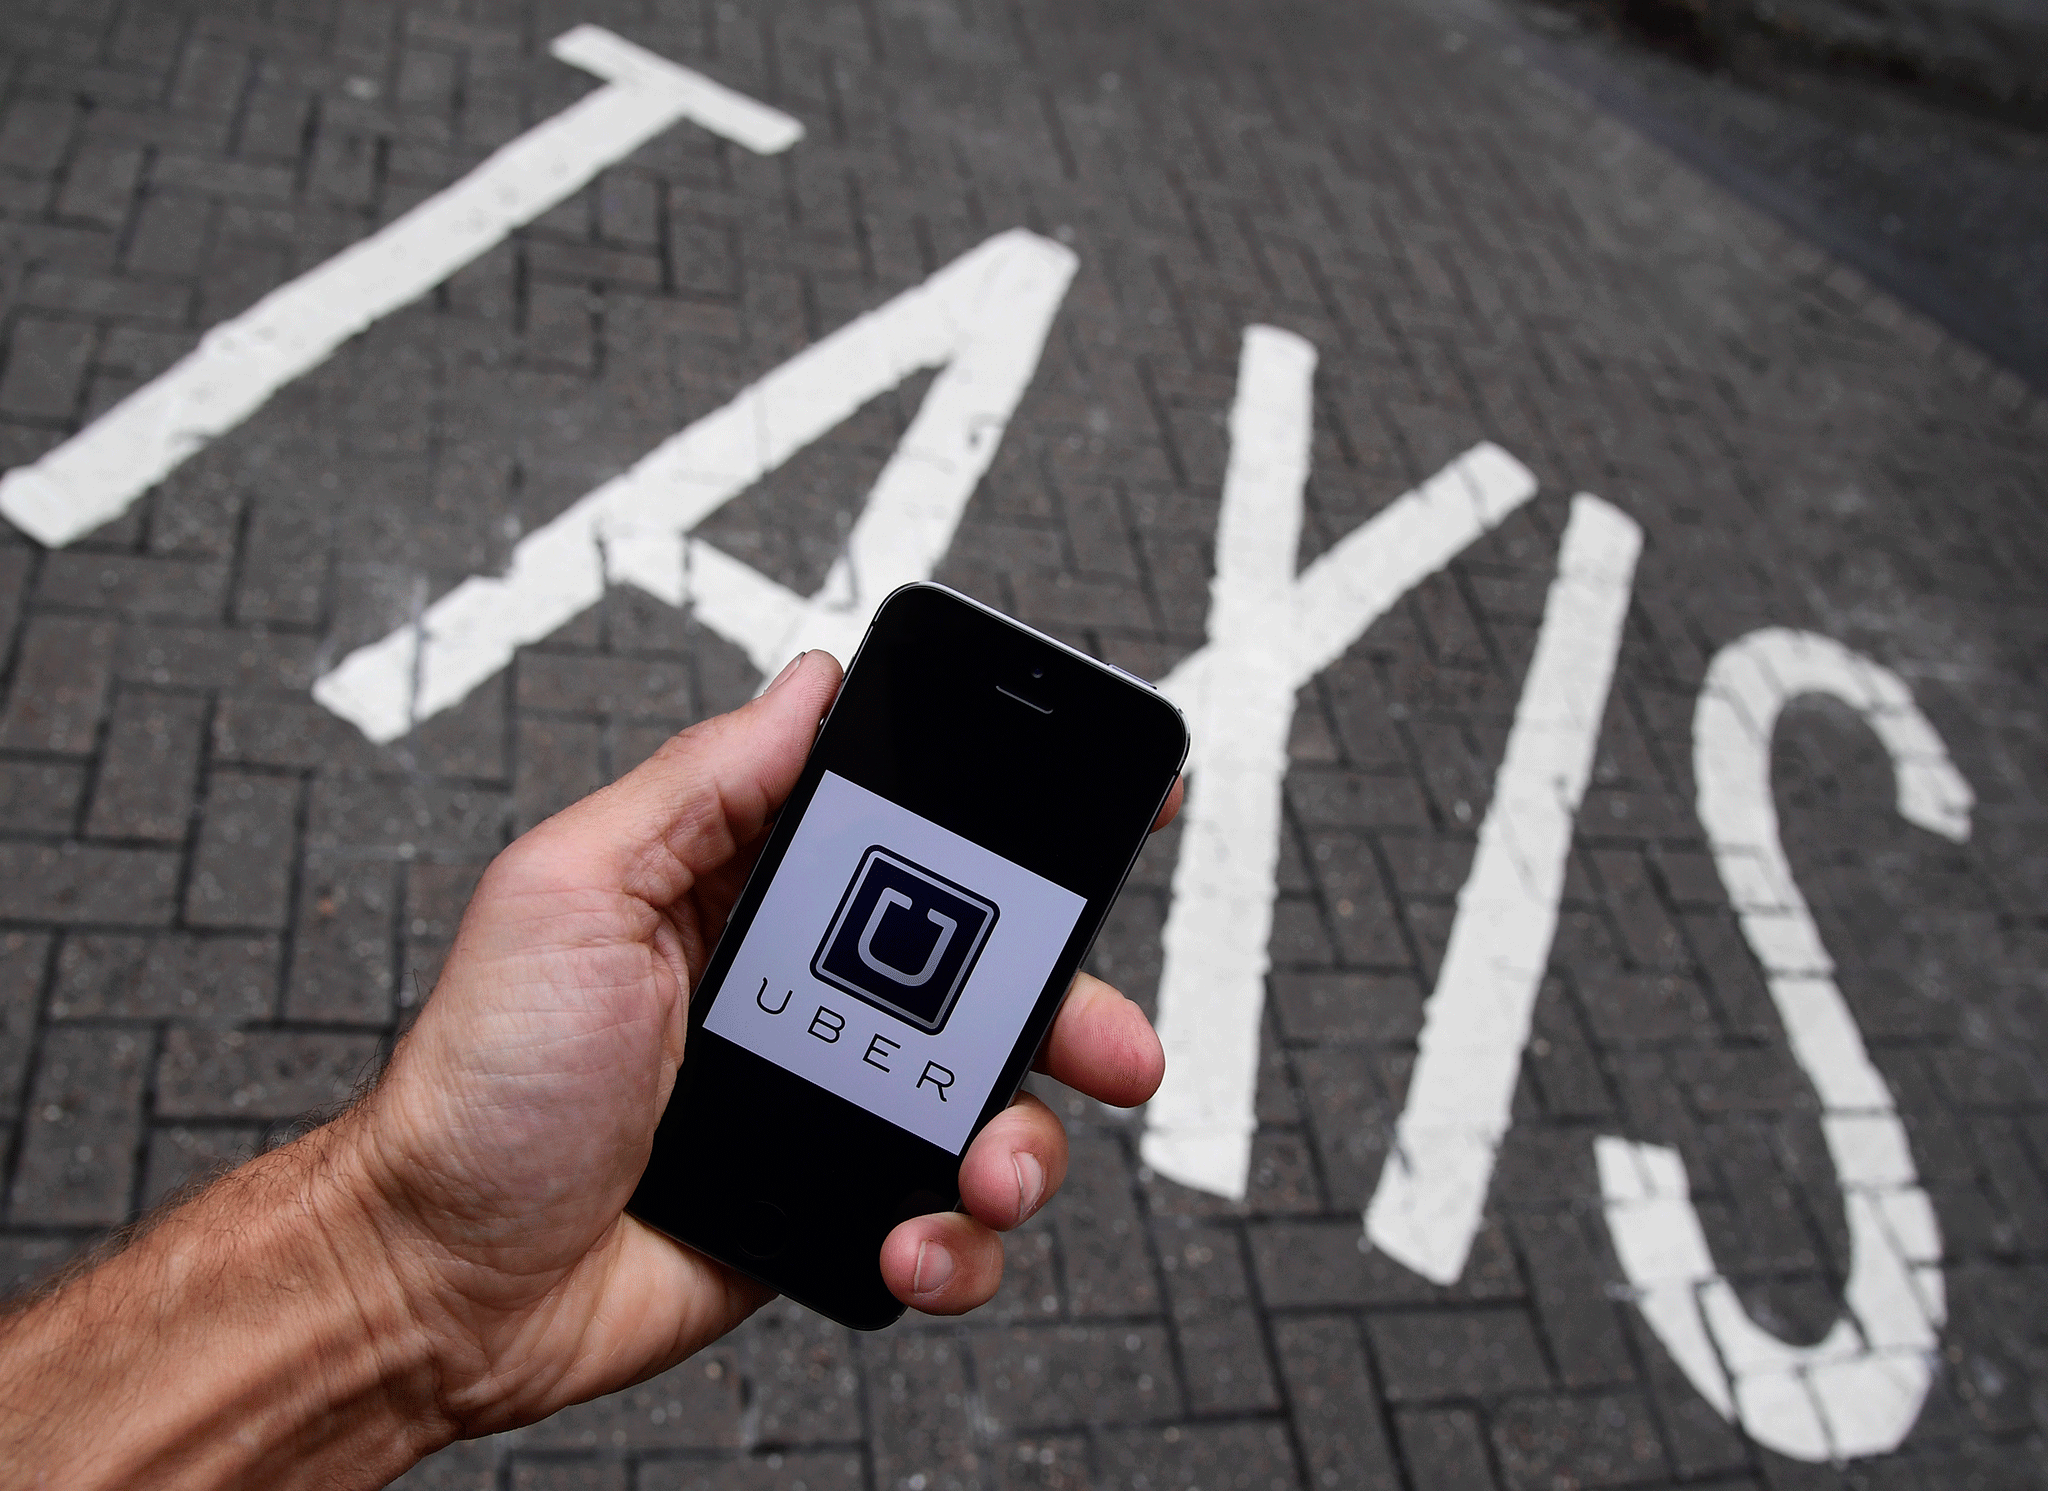 Uber’s revenues are at the expense of traditional taxis and hire cars